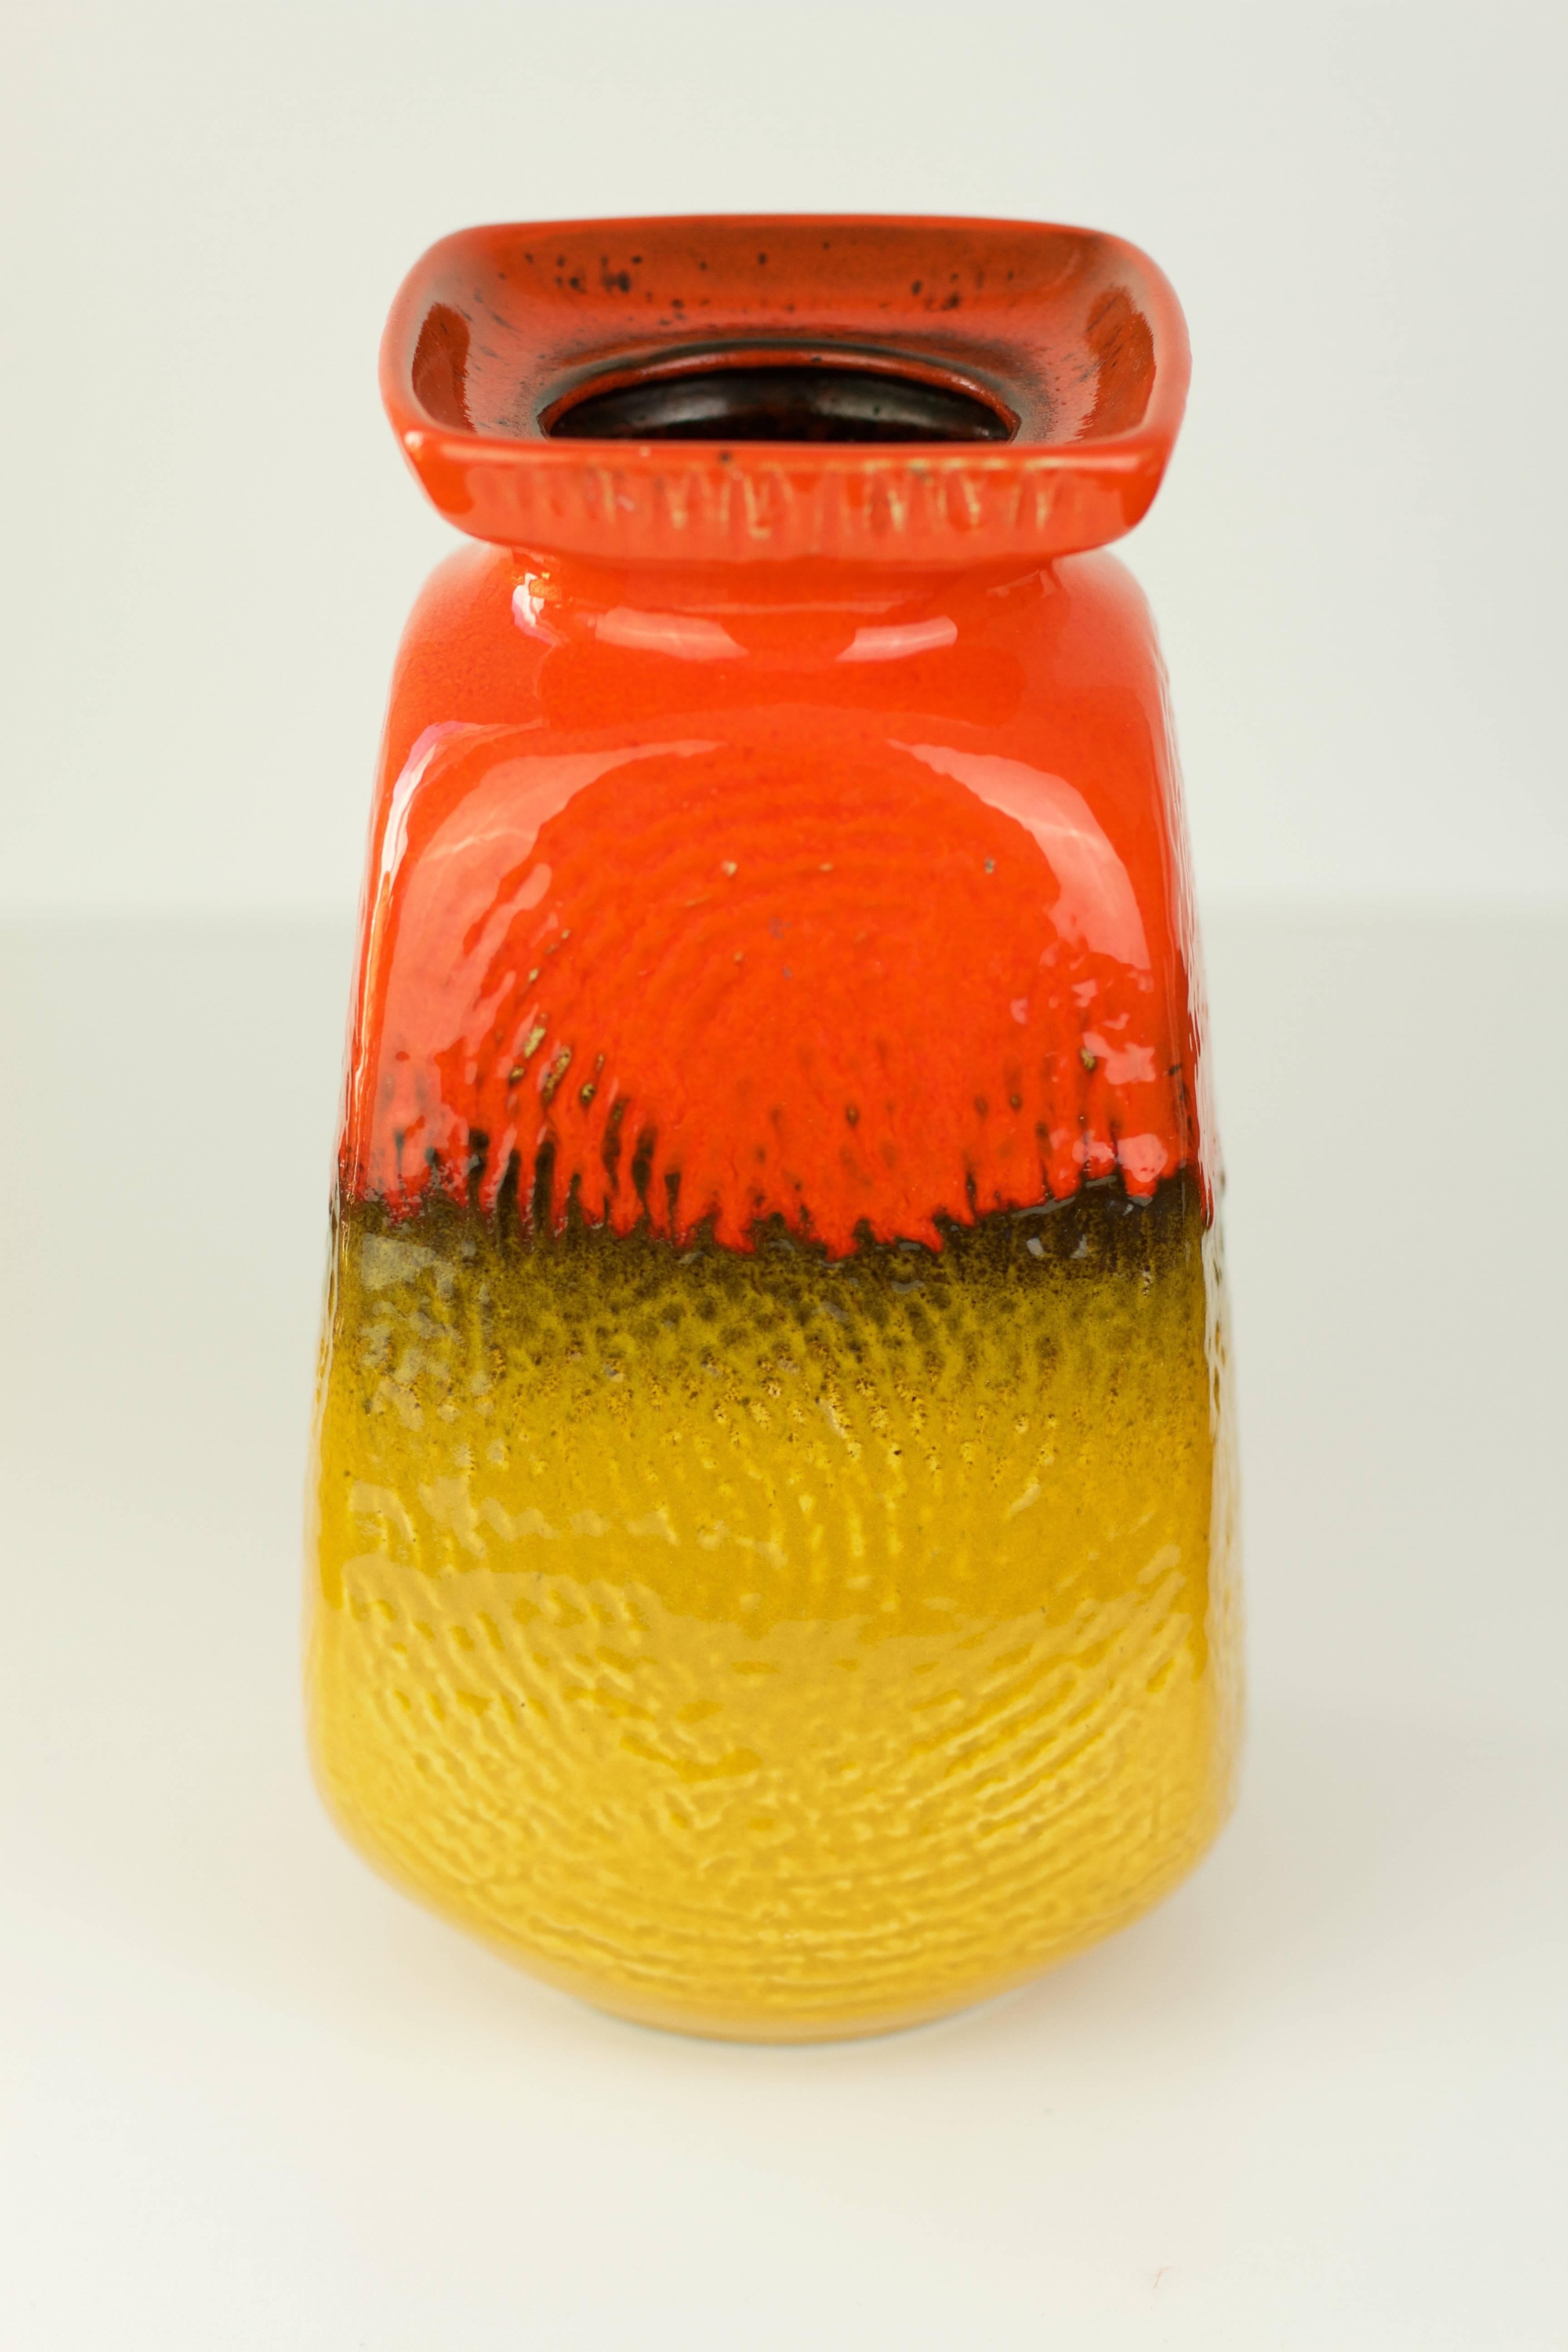 A beautiful vase in striking bright orange and mustard yellow with an embossed pattern resembling a fingerprint - shape number 3151124 - produced by Jasba Pottery in the mid-1970s.

This vase makes a fantastic, striking statement when displayed on